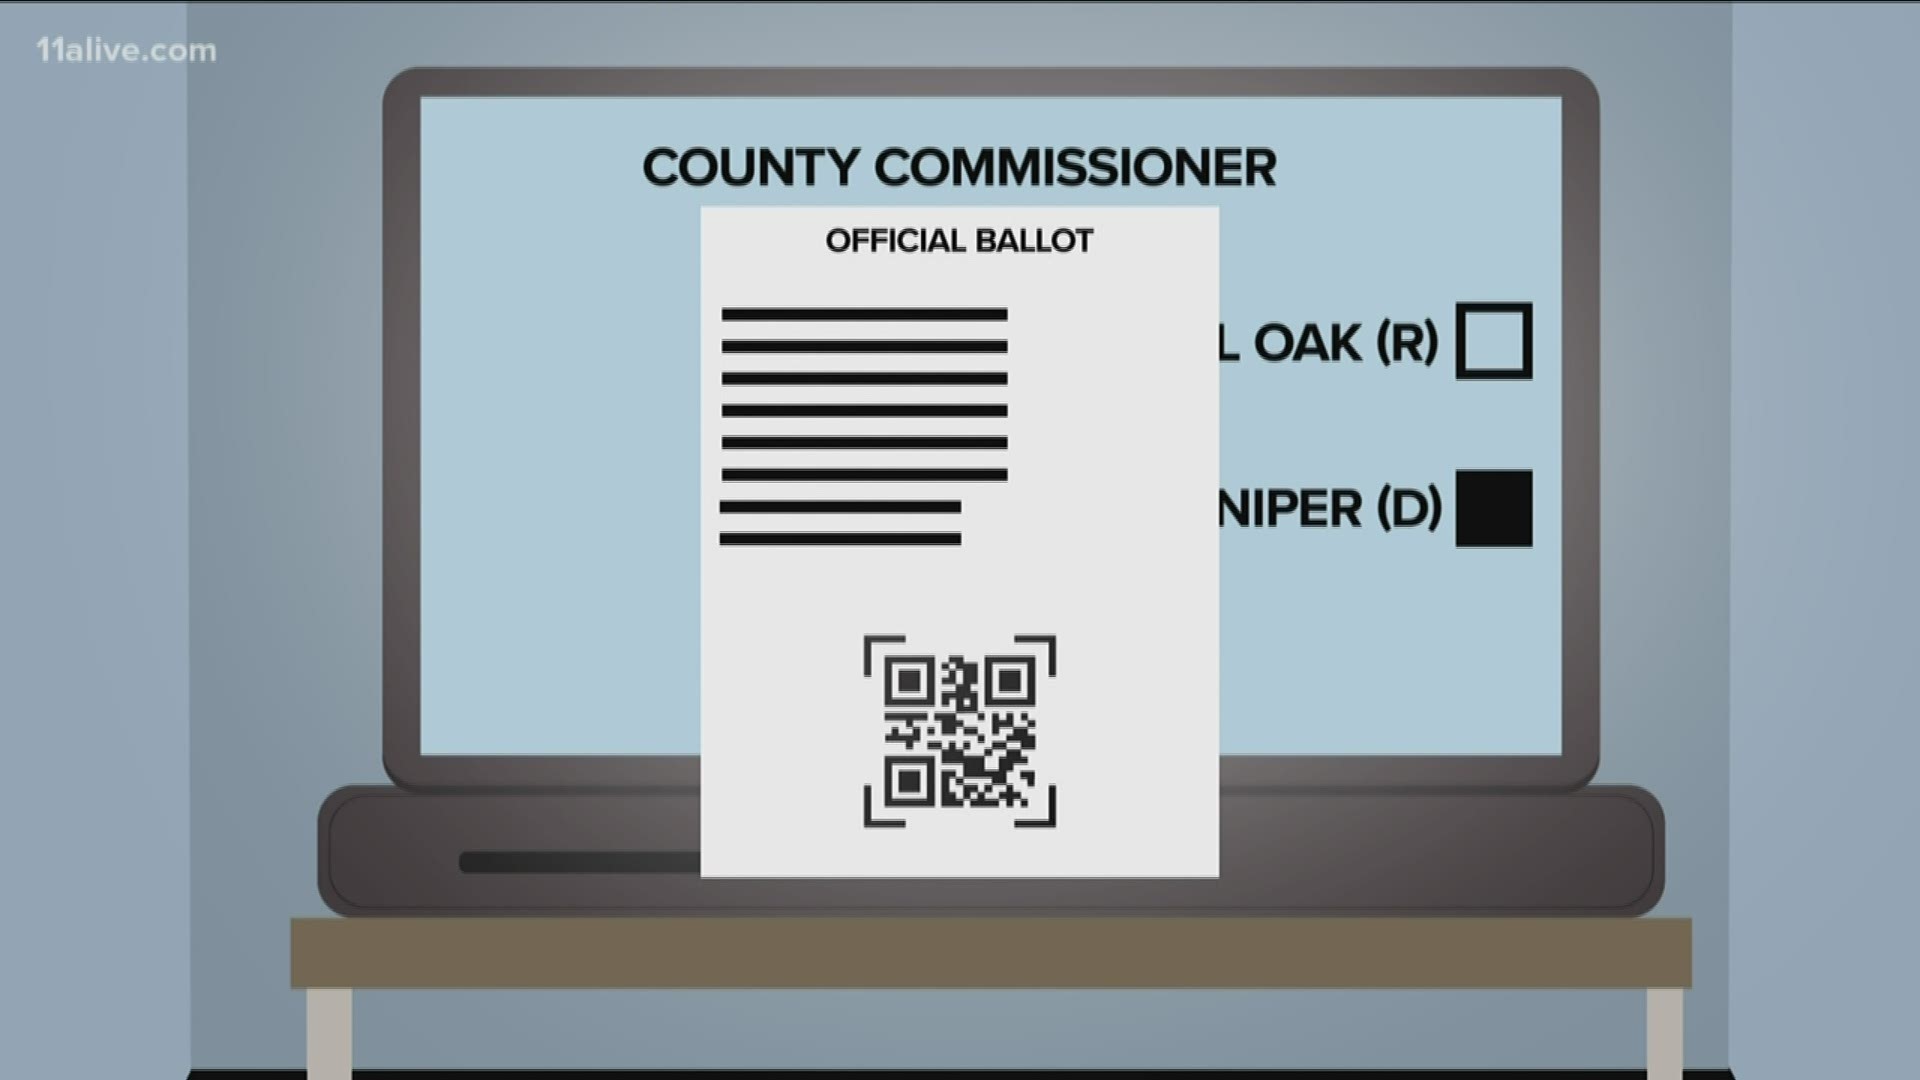 Next year, the state of Georgia wants voters to use a new voting machine from a company called Dominion voting systems.